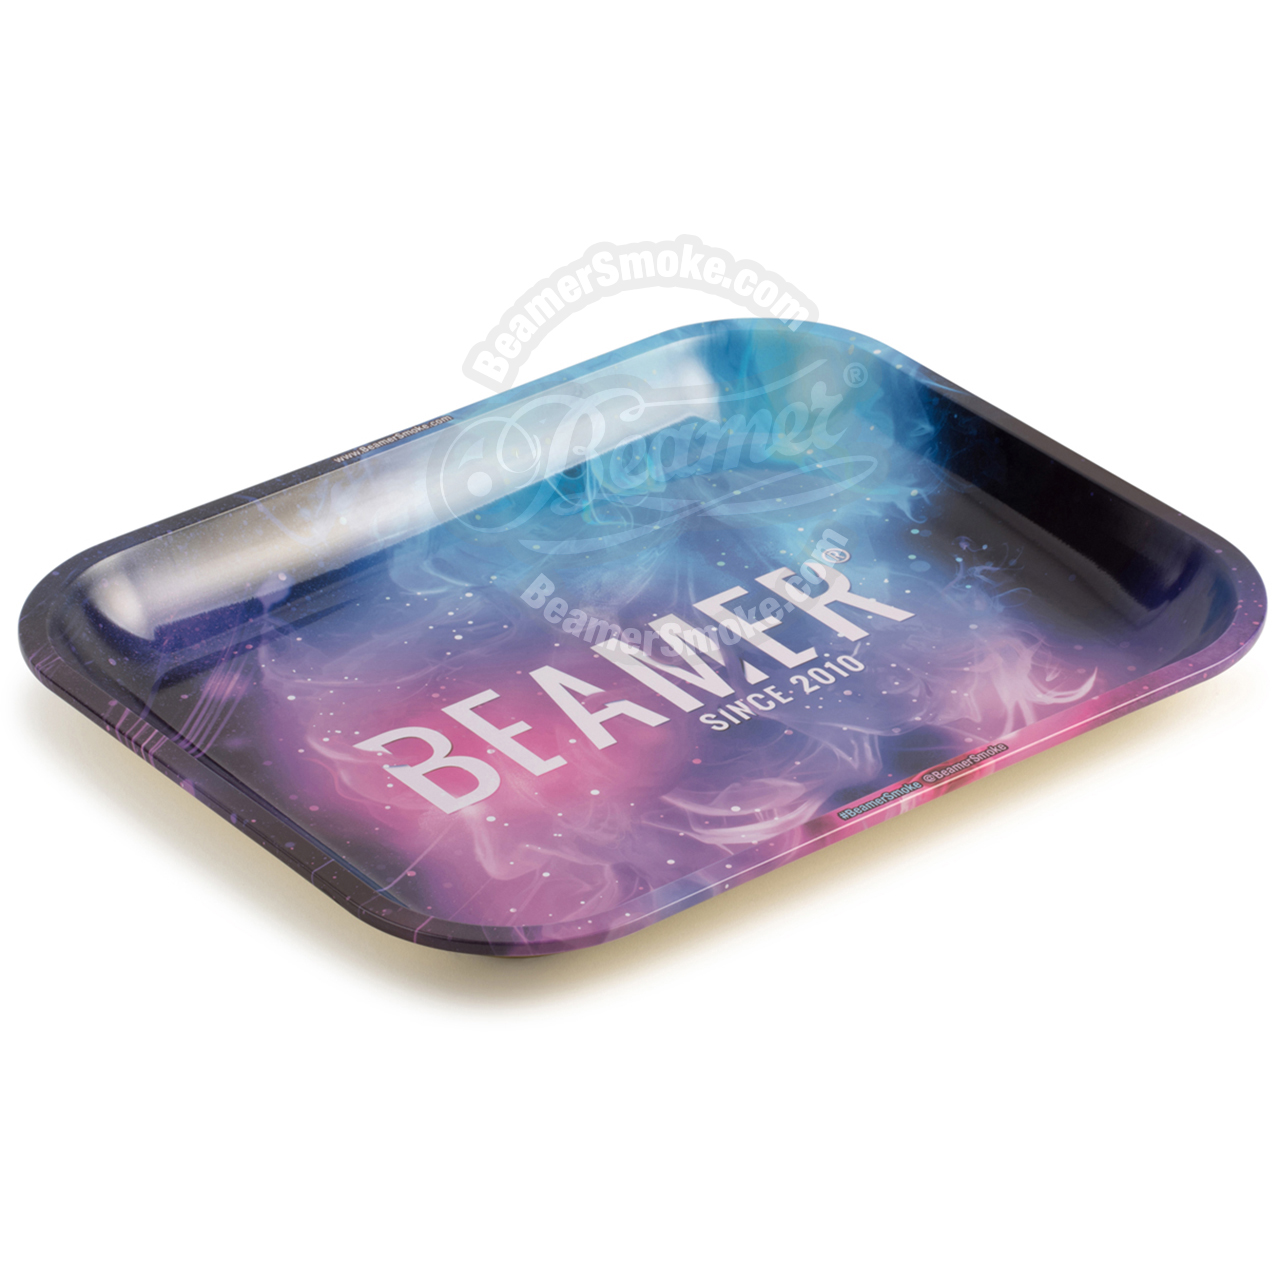 Beamer Large Metal Rolling Tray, Outer Space Design - 13.5 x 11